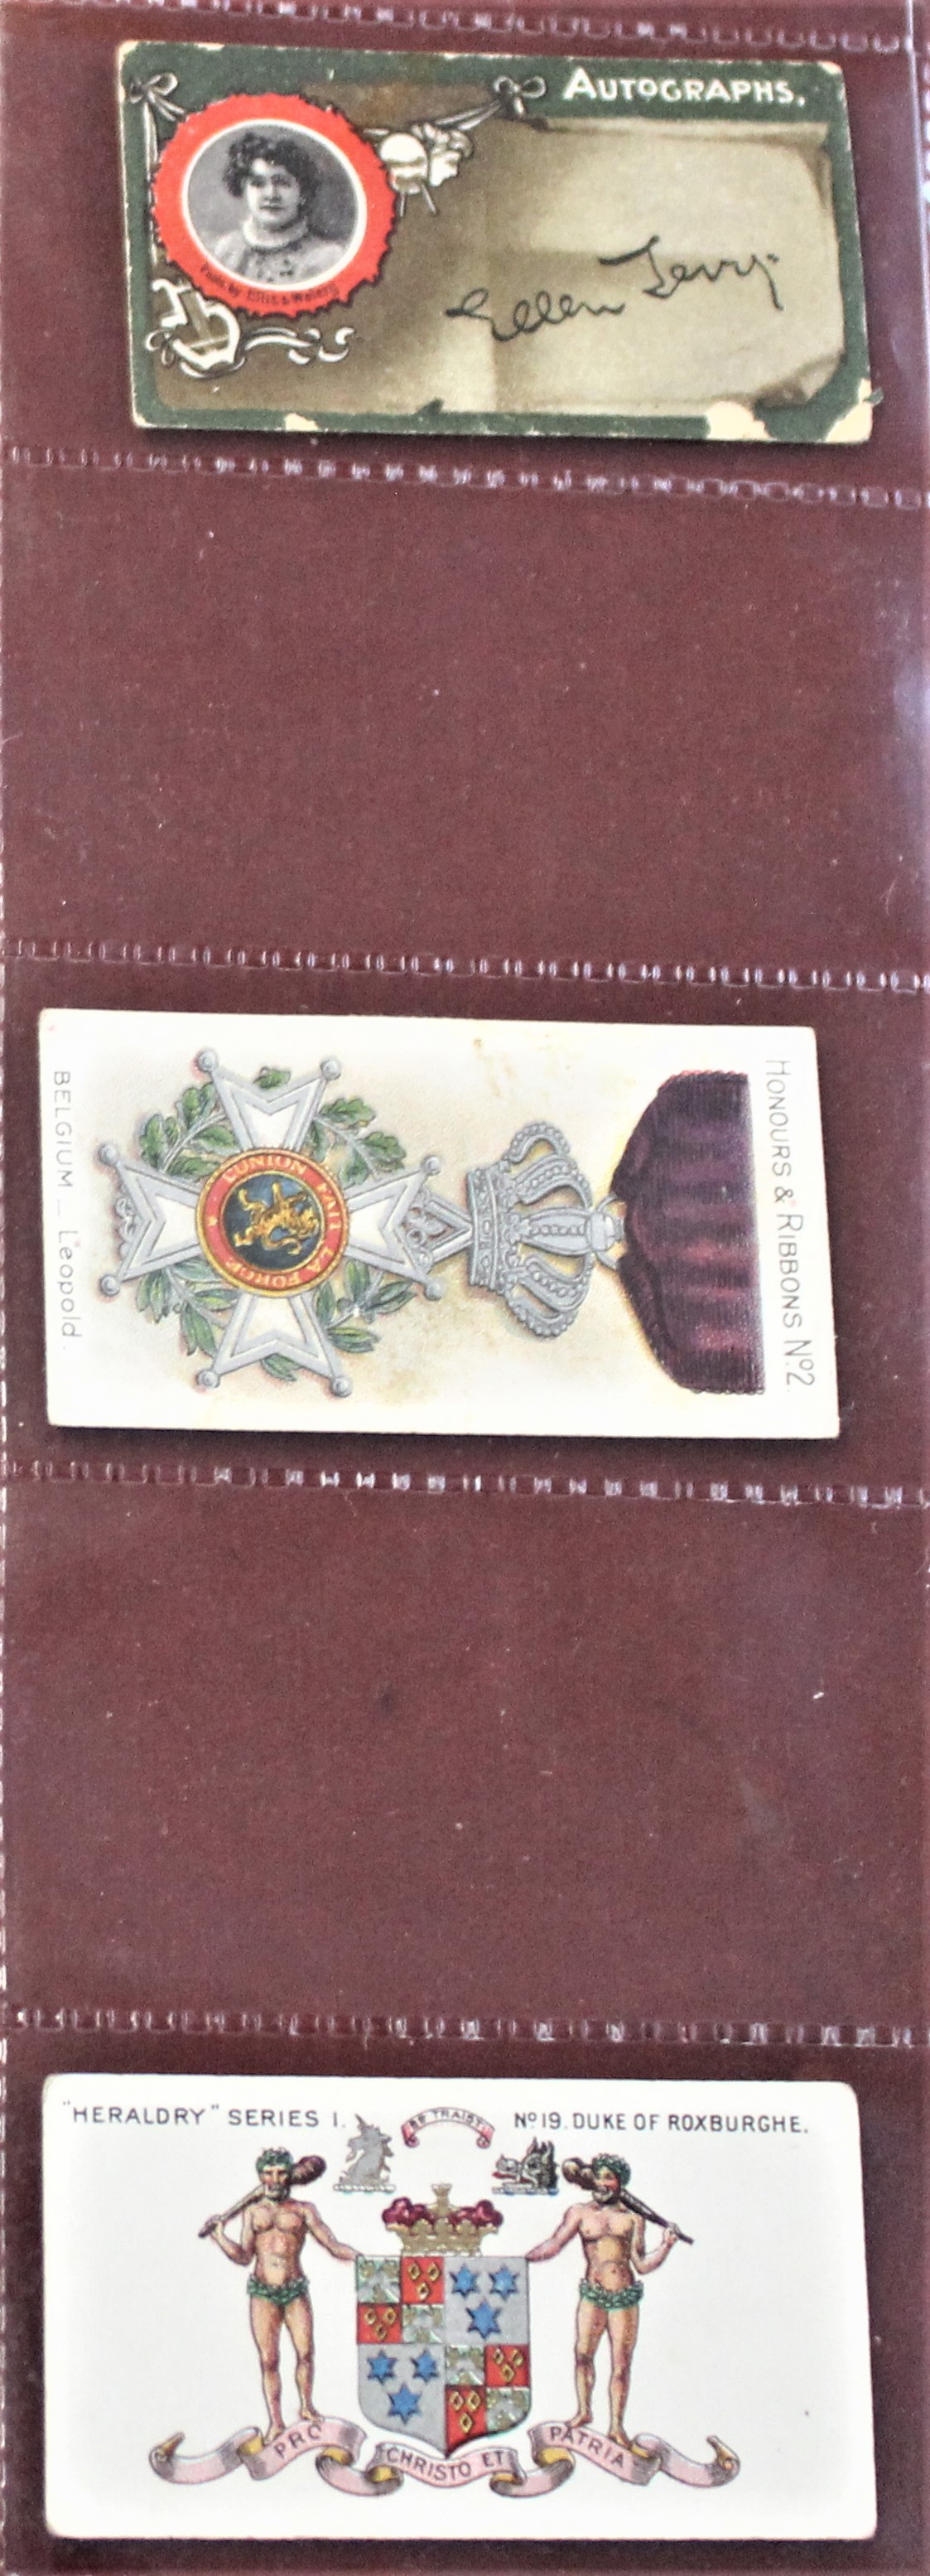 Taddy & Co., Autographs (1) card in poor condition, Heraldry (1) card in good condition and